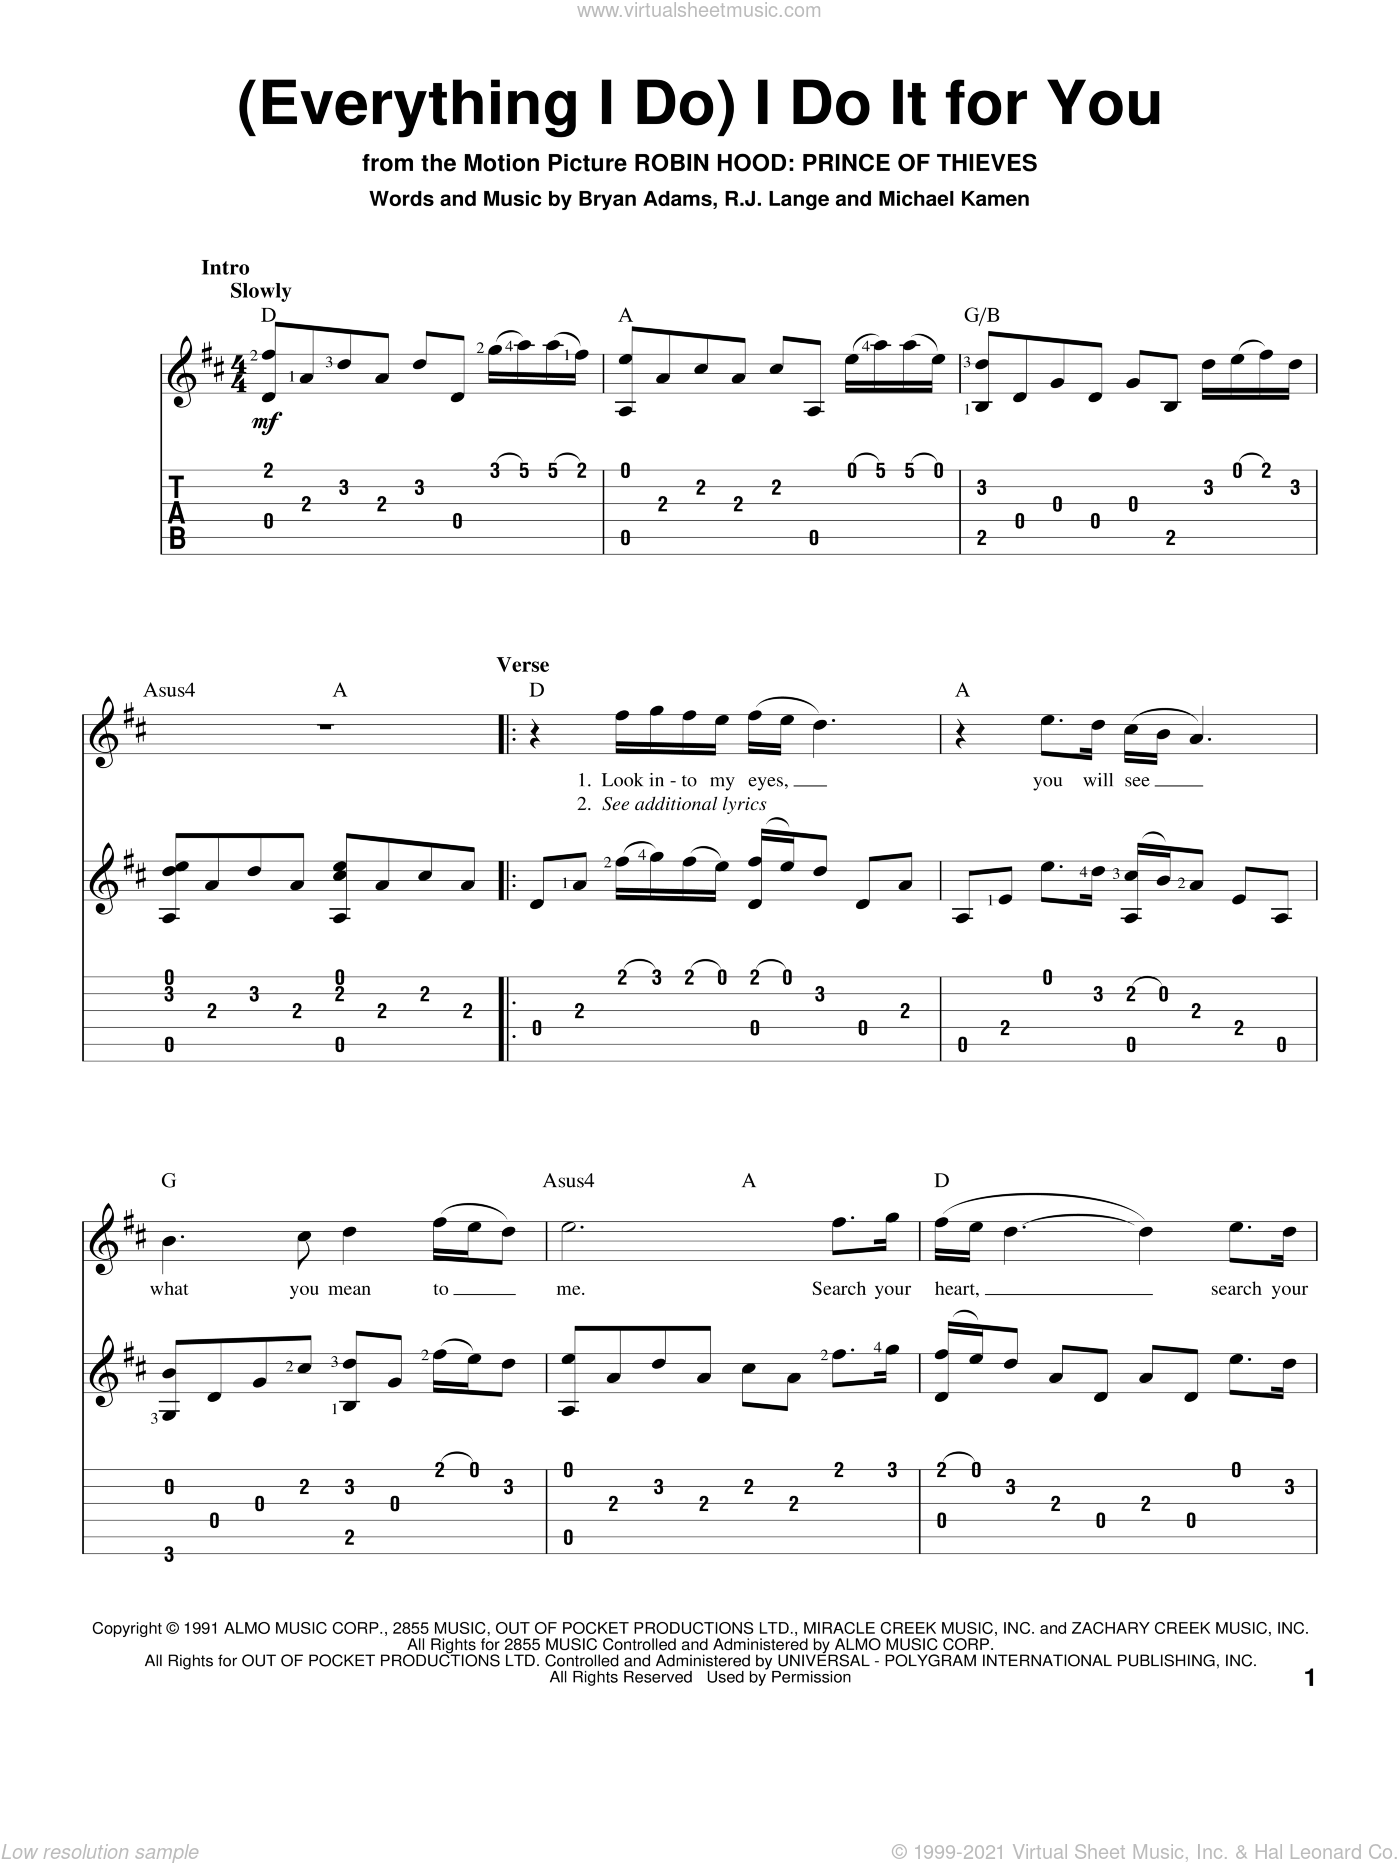 Song lyrics with guitar chords for Everything I Do  Guitar chords and  lyrics, Guitar chords, Guitar chords for songs